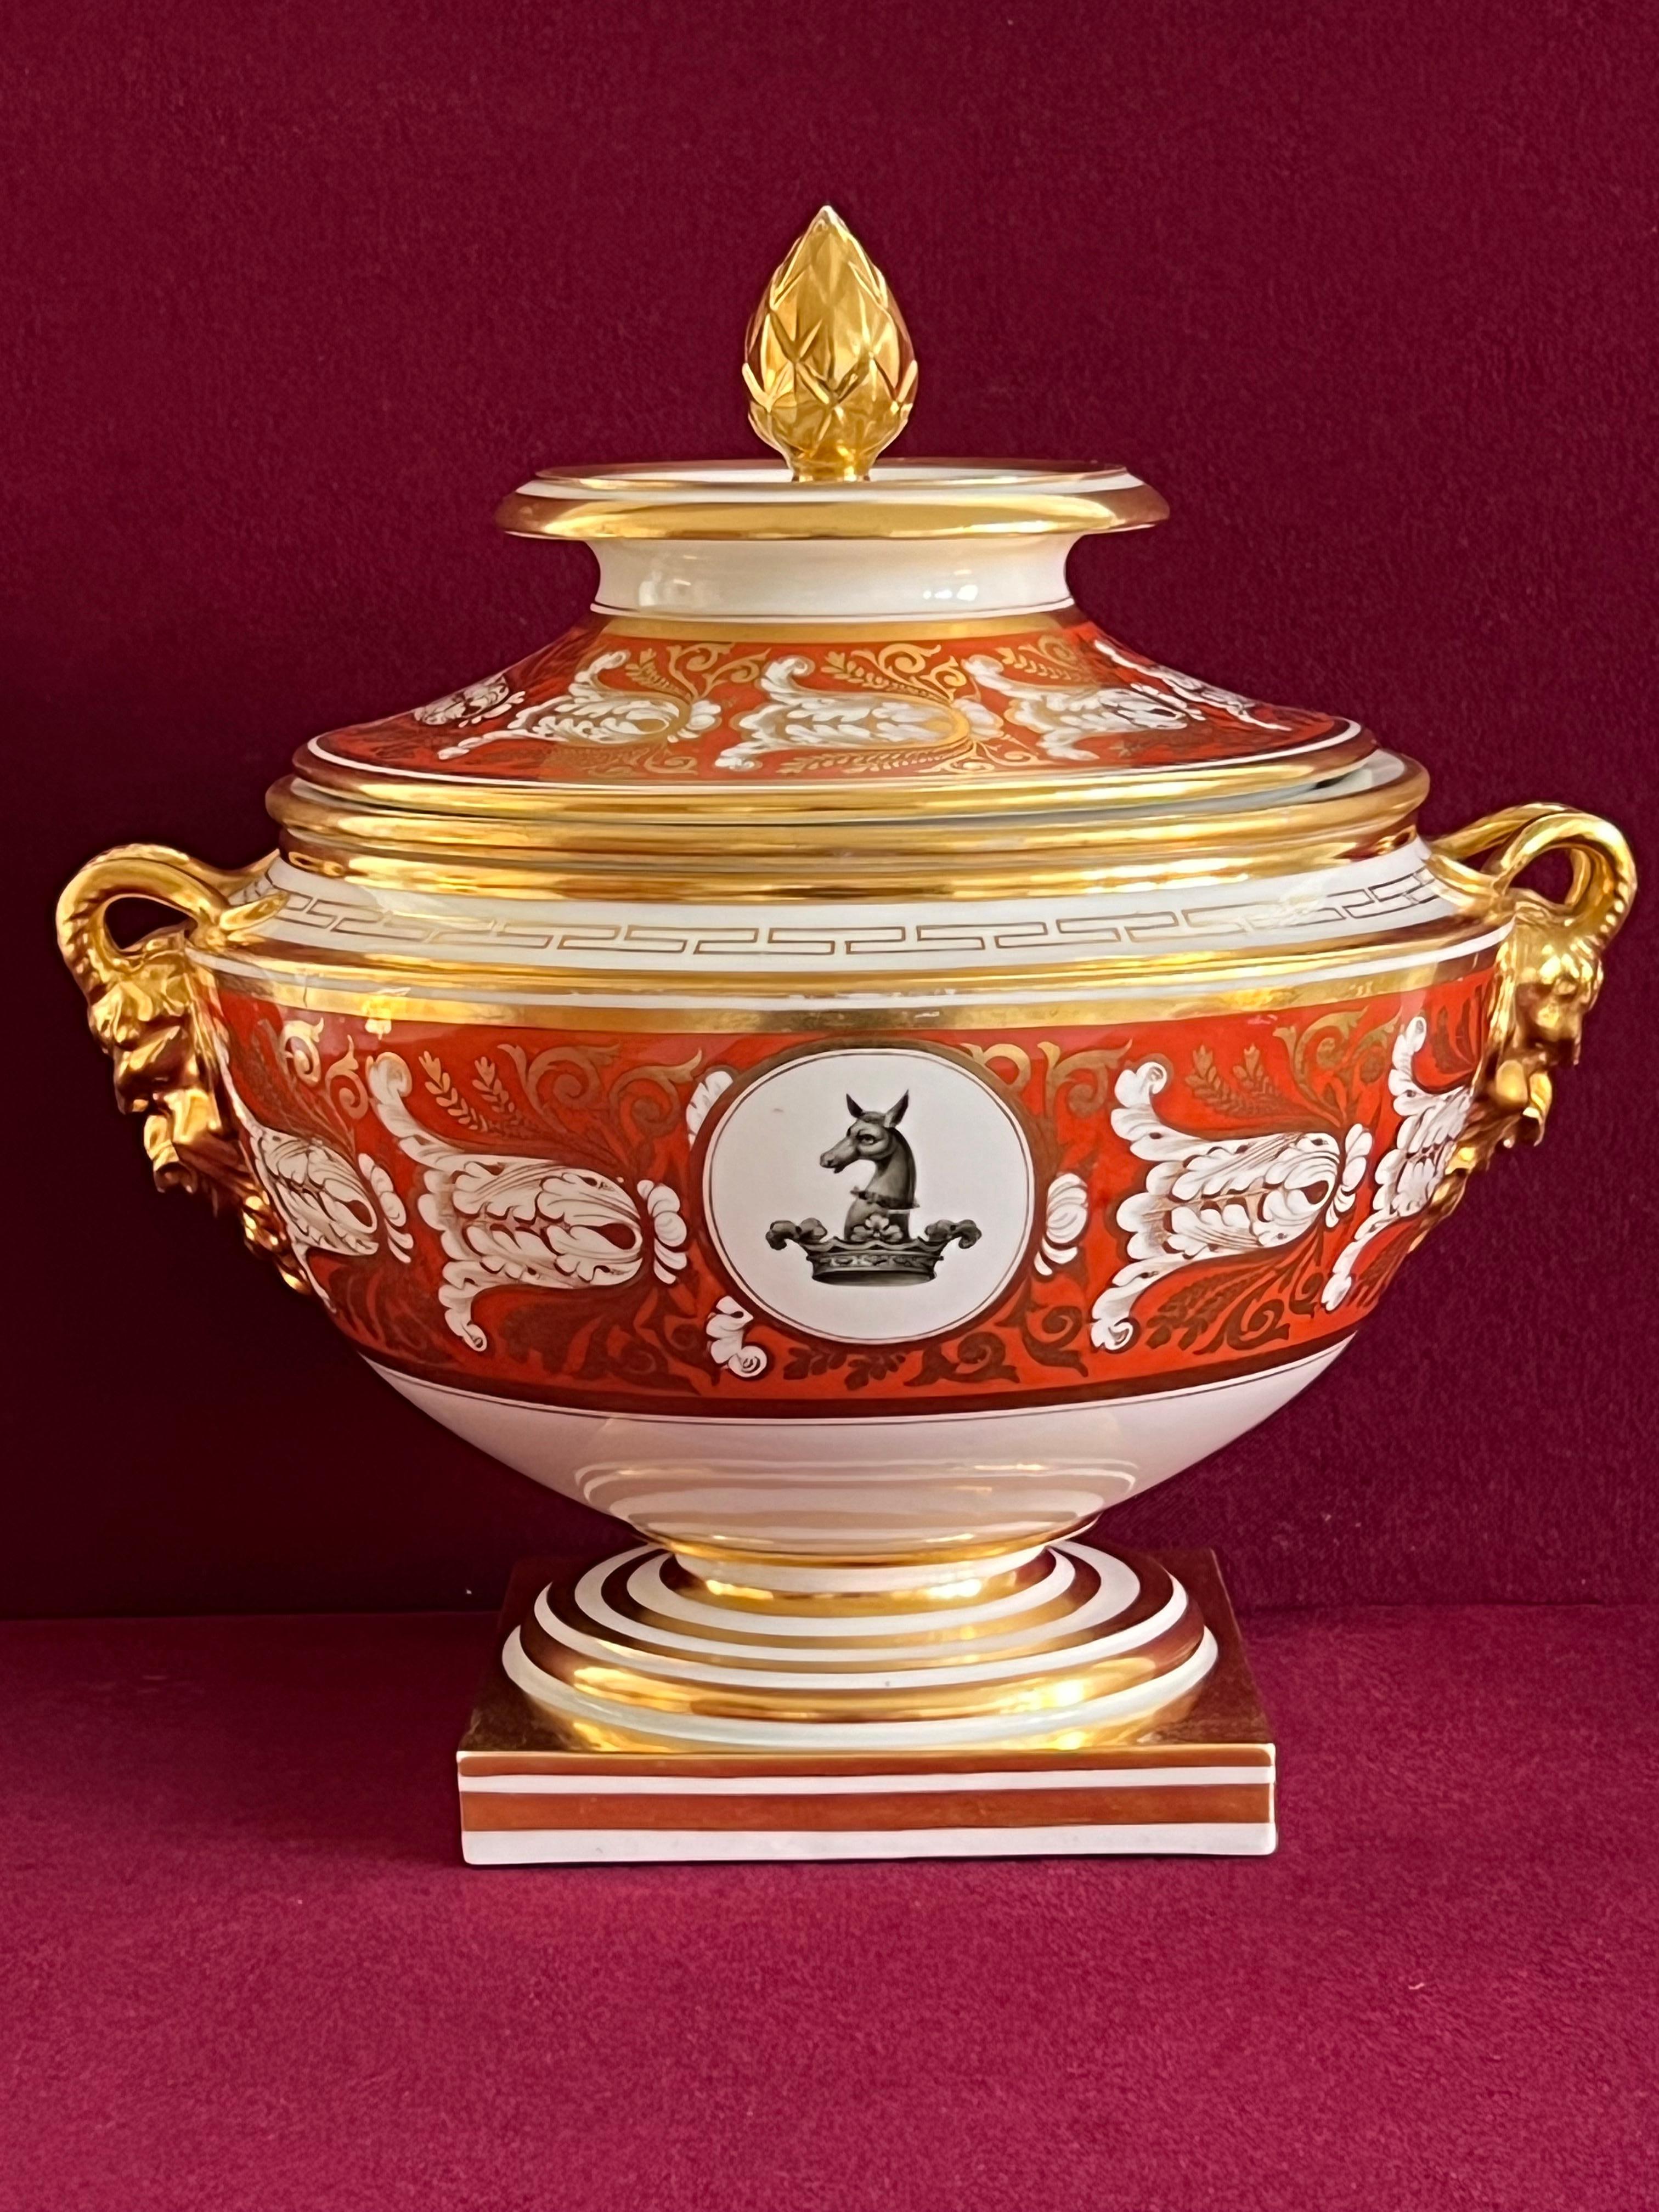 A magnificent and rare Barr, Flight & Barr Porcelain Fruit Cooler c.1804-1813. Superbly decorated with a continuous deep orange ground band and heavily gilded, highly detailed rams head handles, greek key motif to header and a crowned deer armorial